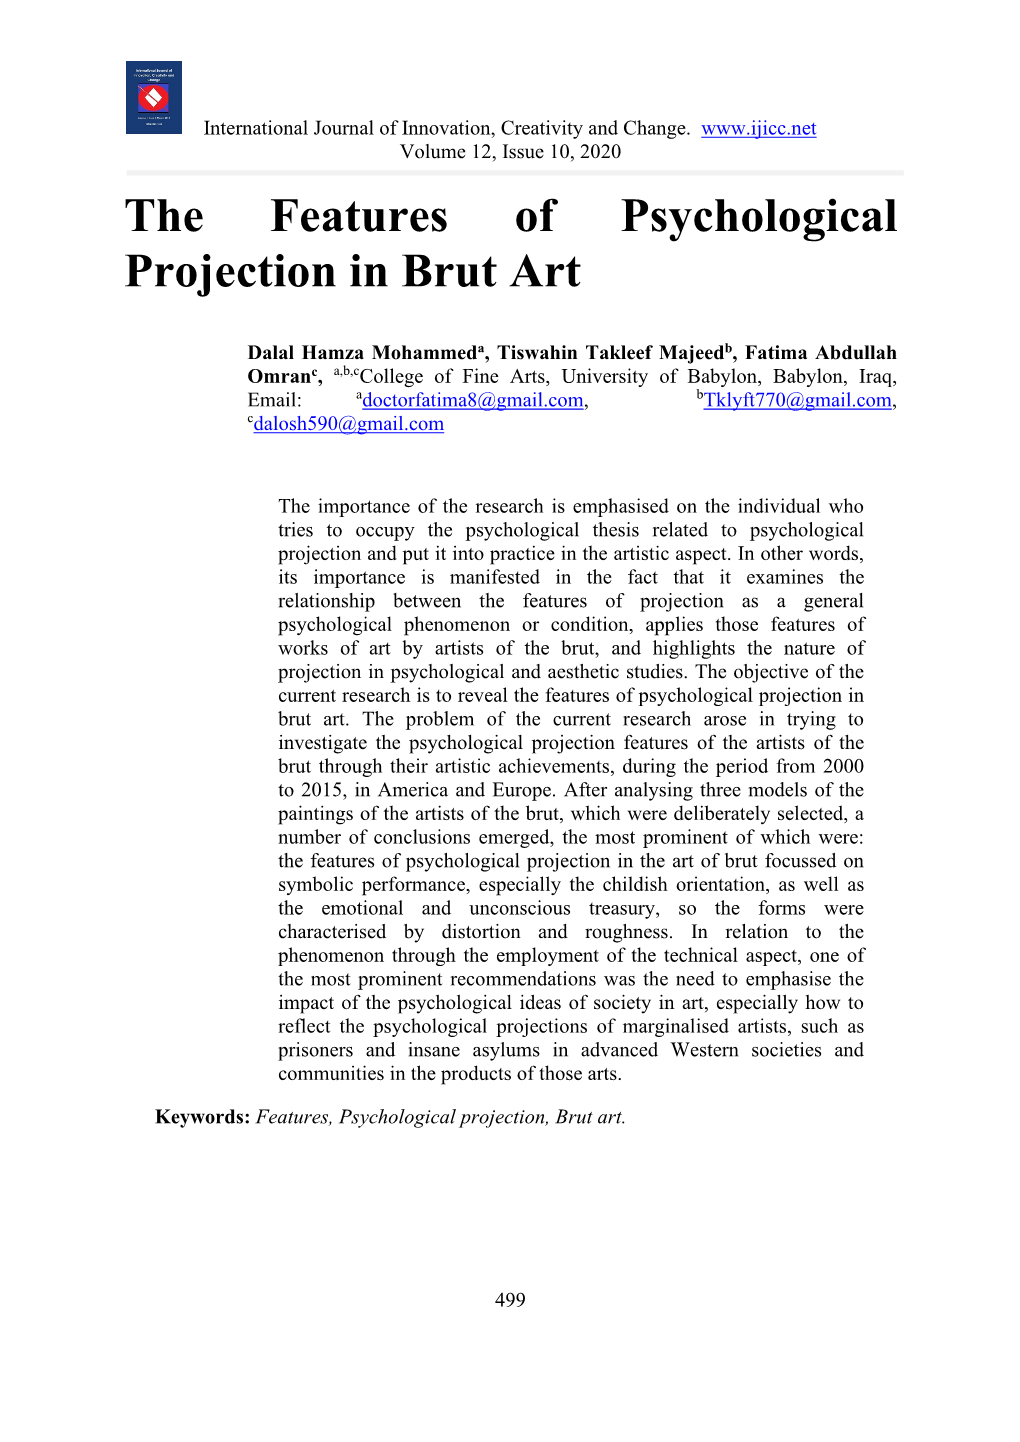 The Features of Psychological Projection in Brut Art